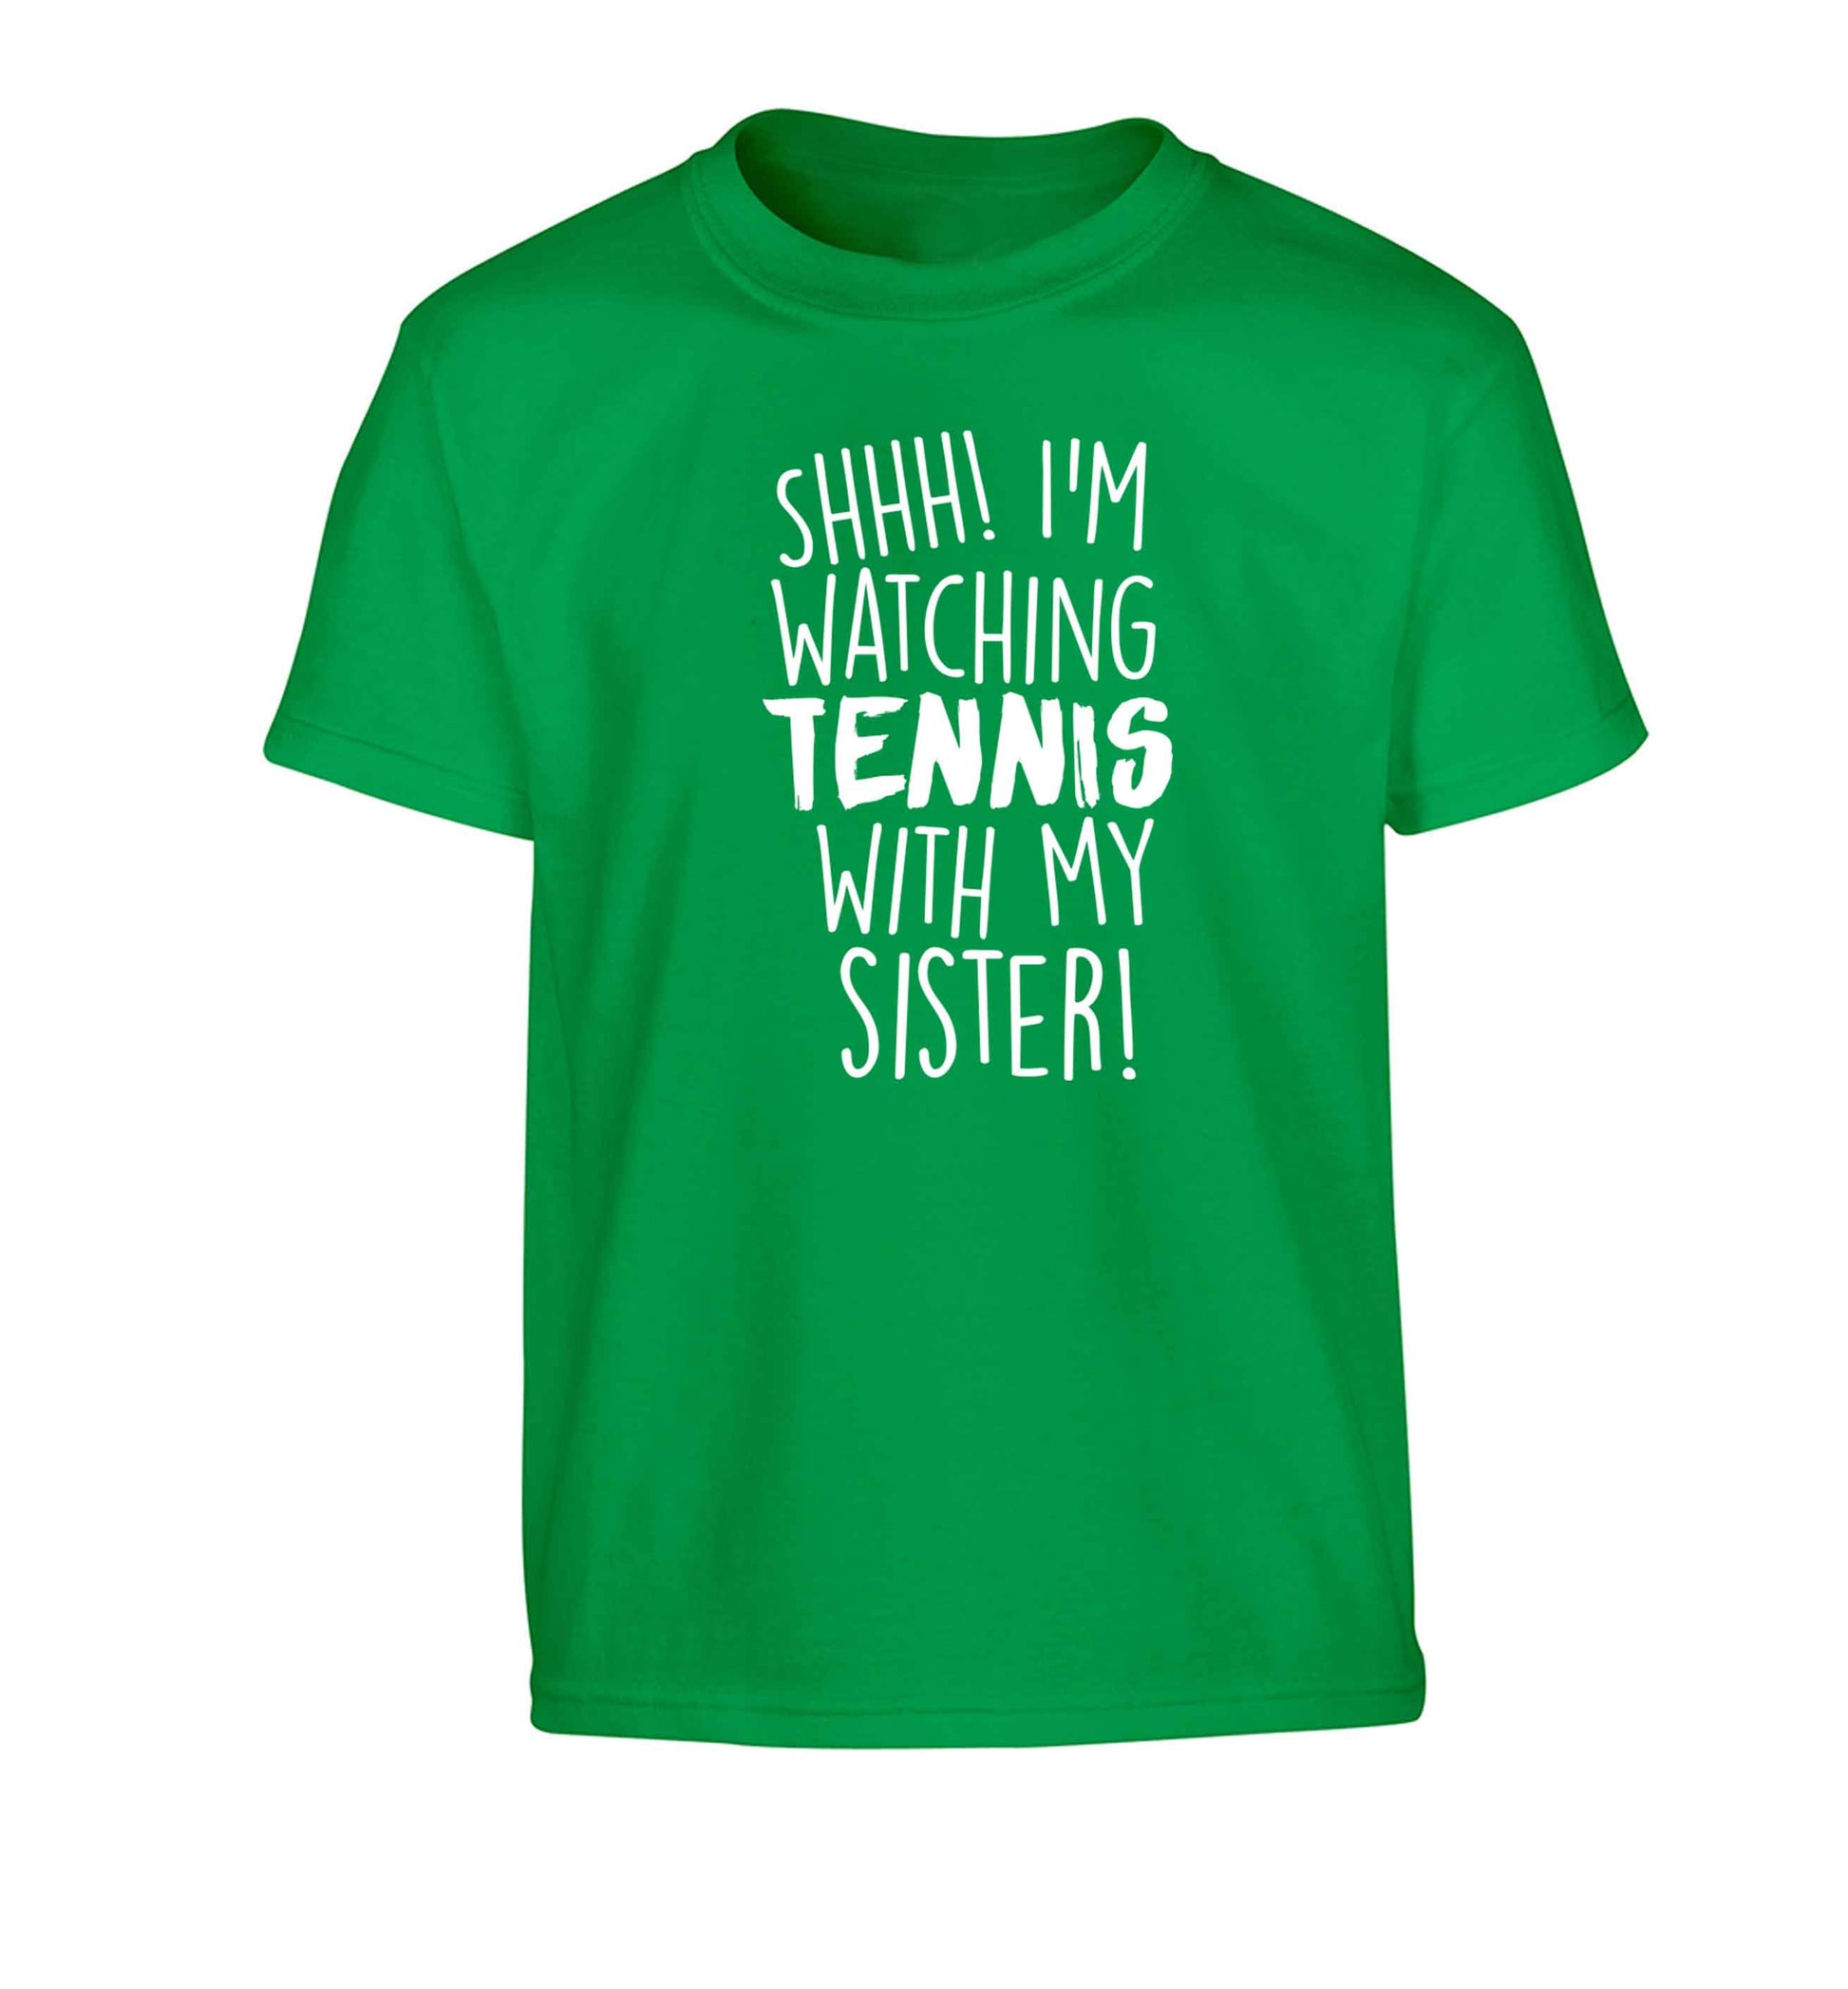 Shh! I'm watching tennis with my sister! Children's green Tshirt 12-13 Years